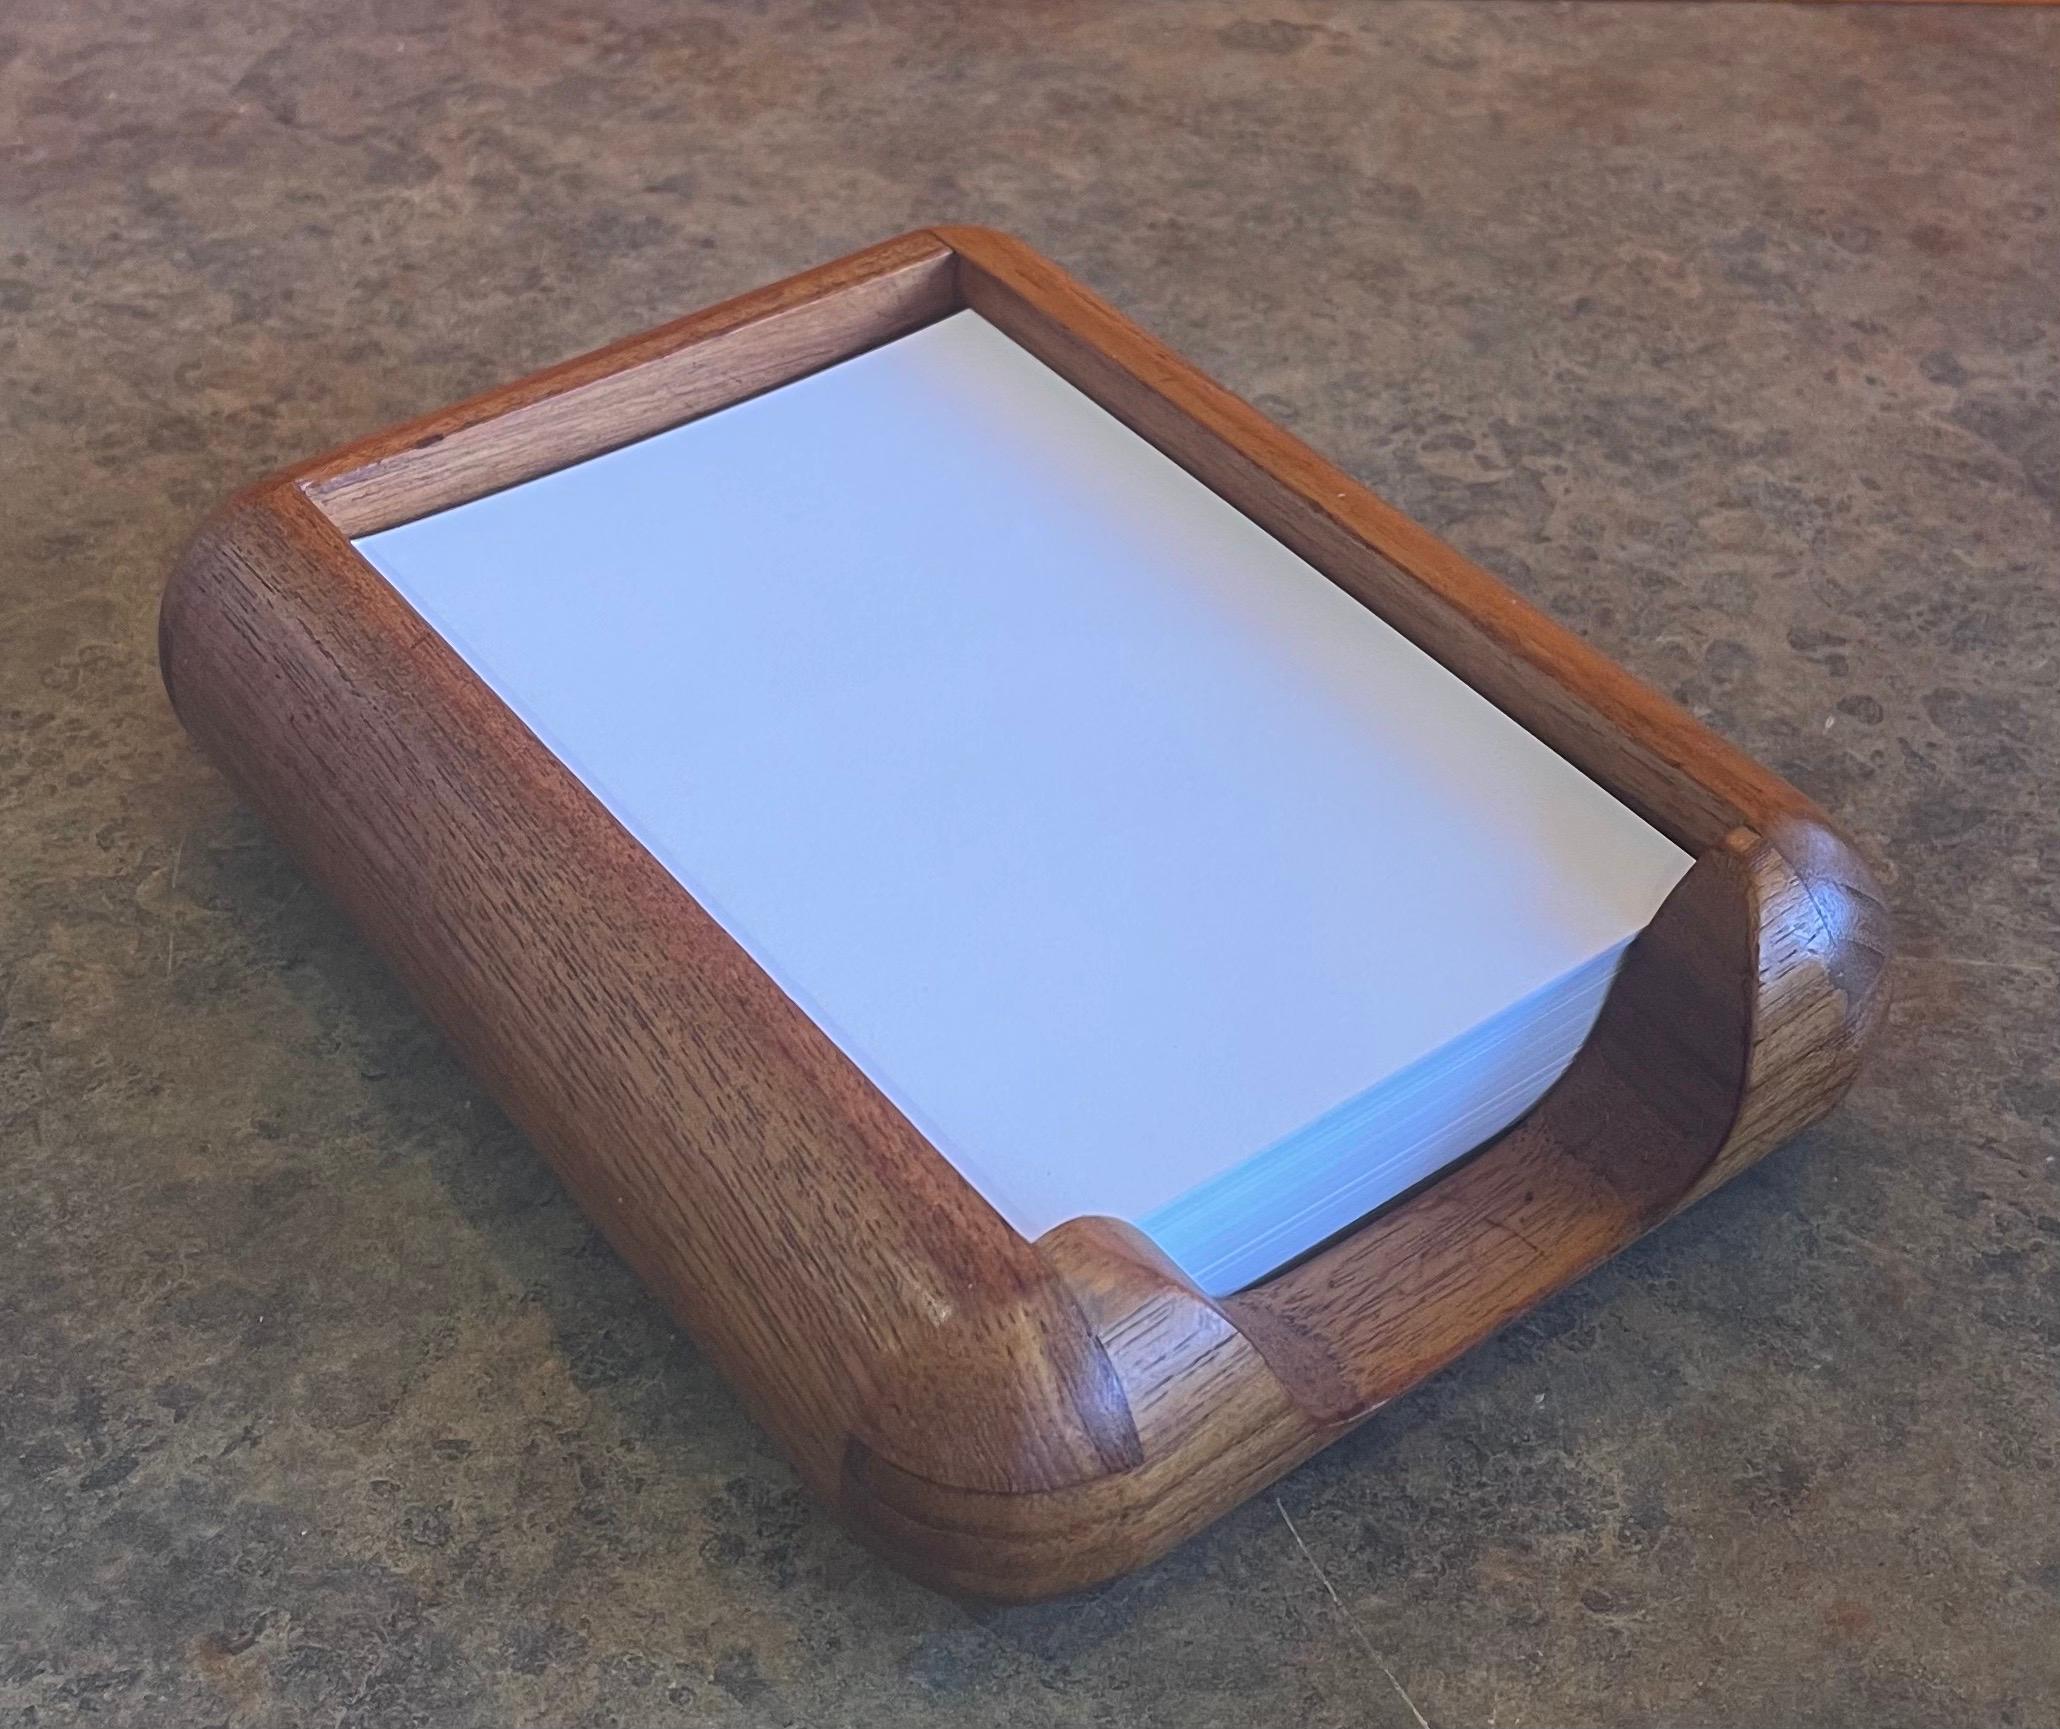 Very functional Danish modern desk paper tray in teak with 500 4